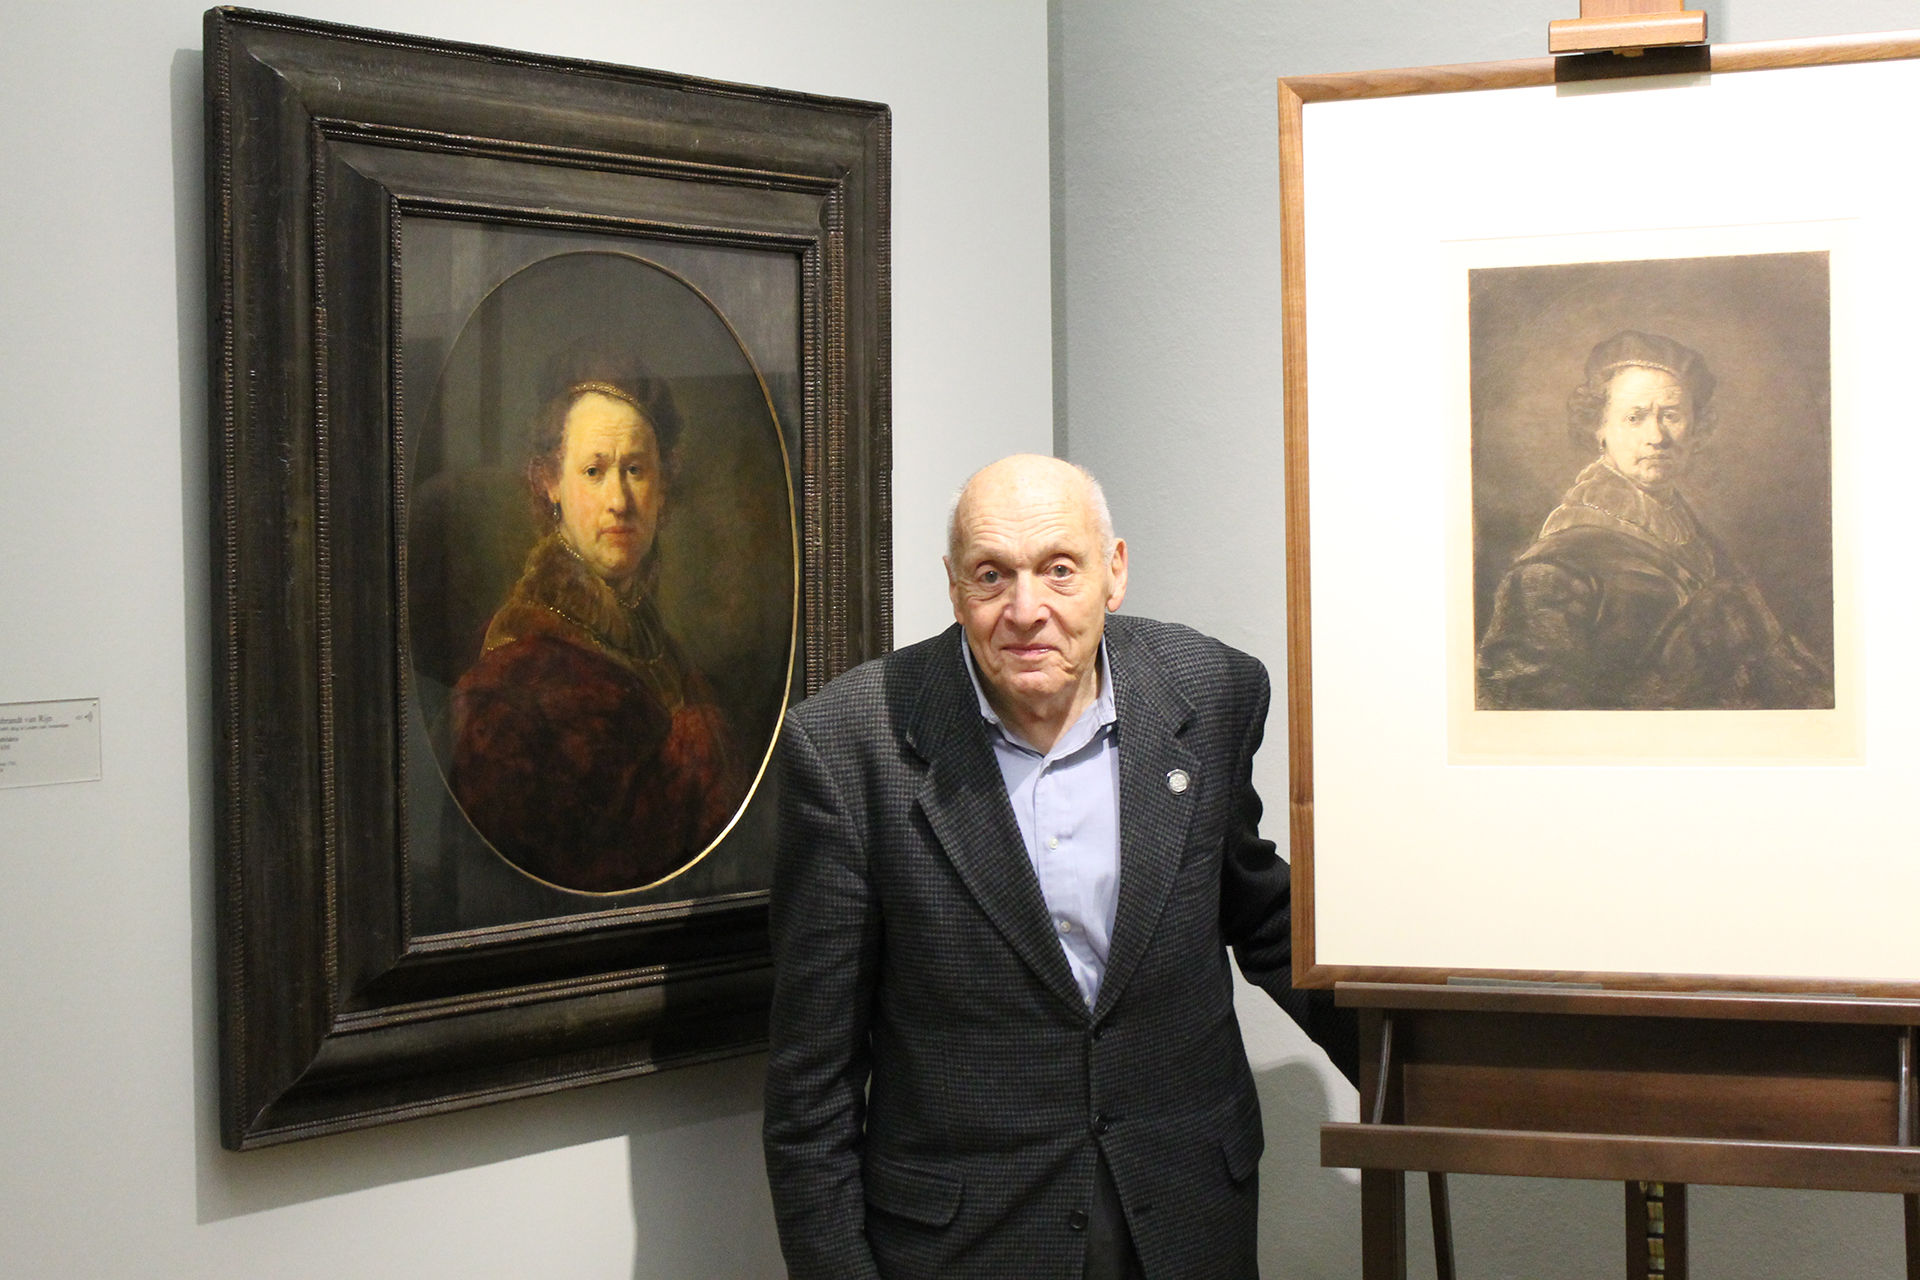 Former art protection officer Harry Ettlinger in front of Rembrandt's self-portrait and the etching by Walter Conz in the Staatliche Kunsthalle Karlsruhe in 2014.